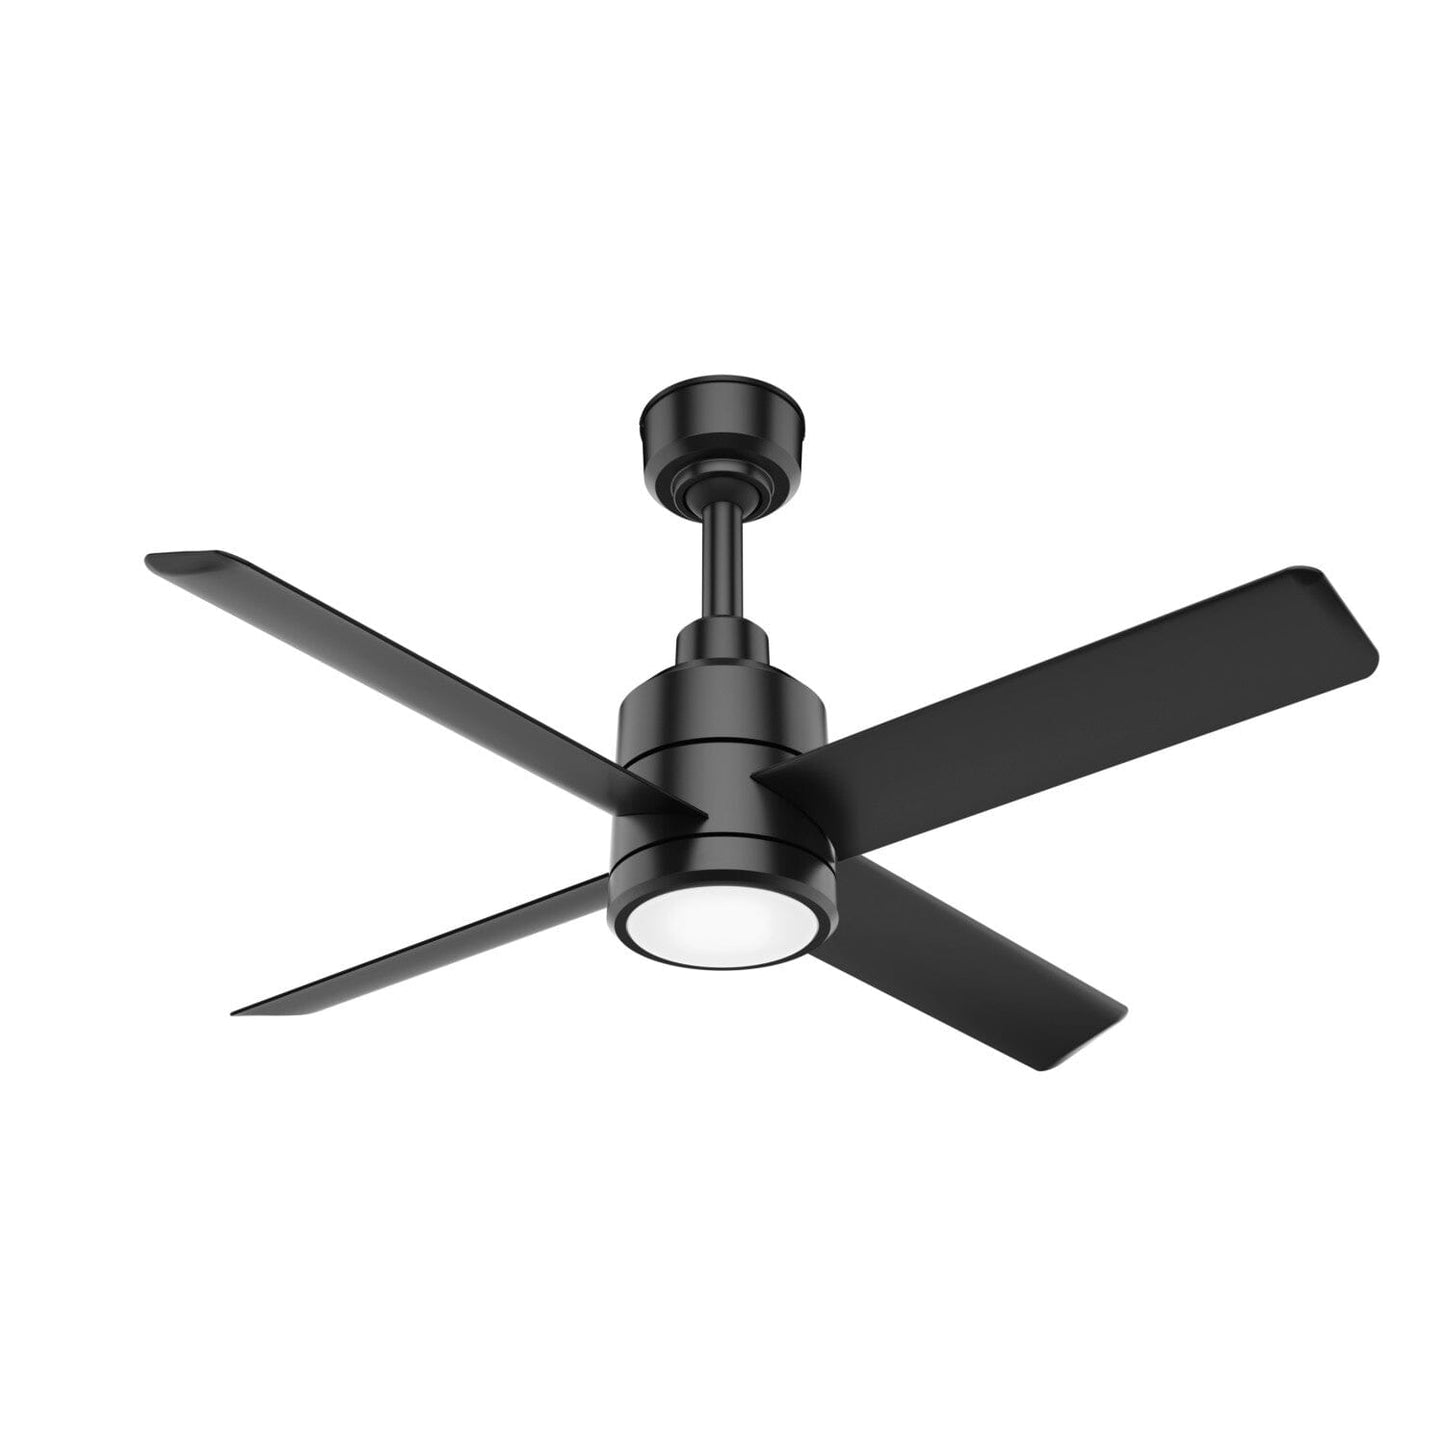 Trak Outdoor with light 60 inches 120V Ceiling Fans Hunter Black - Black 